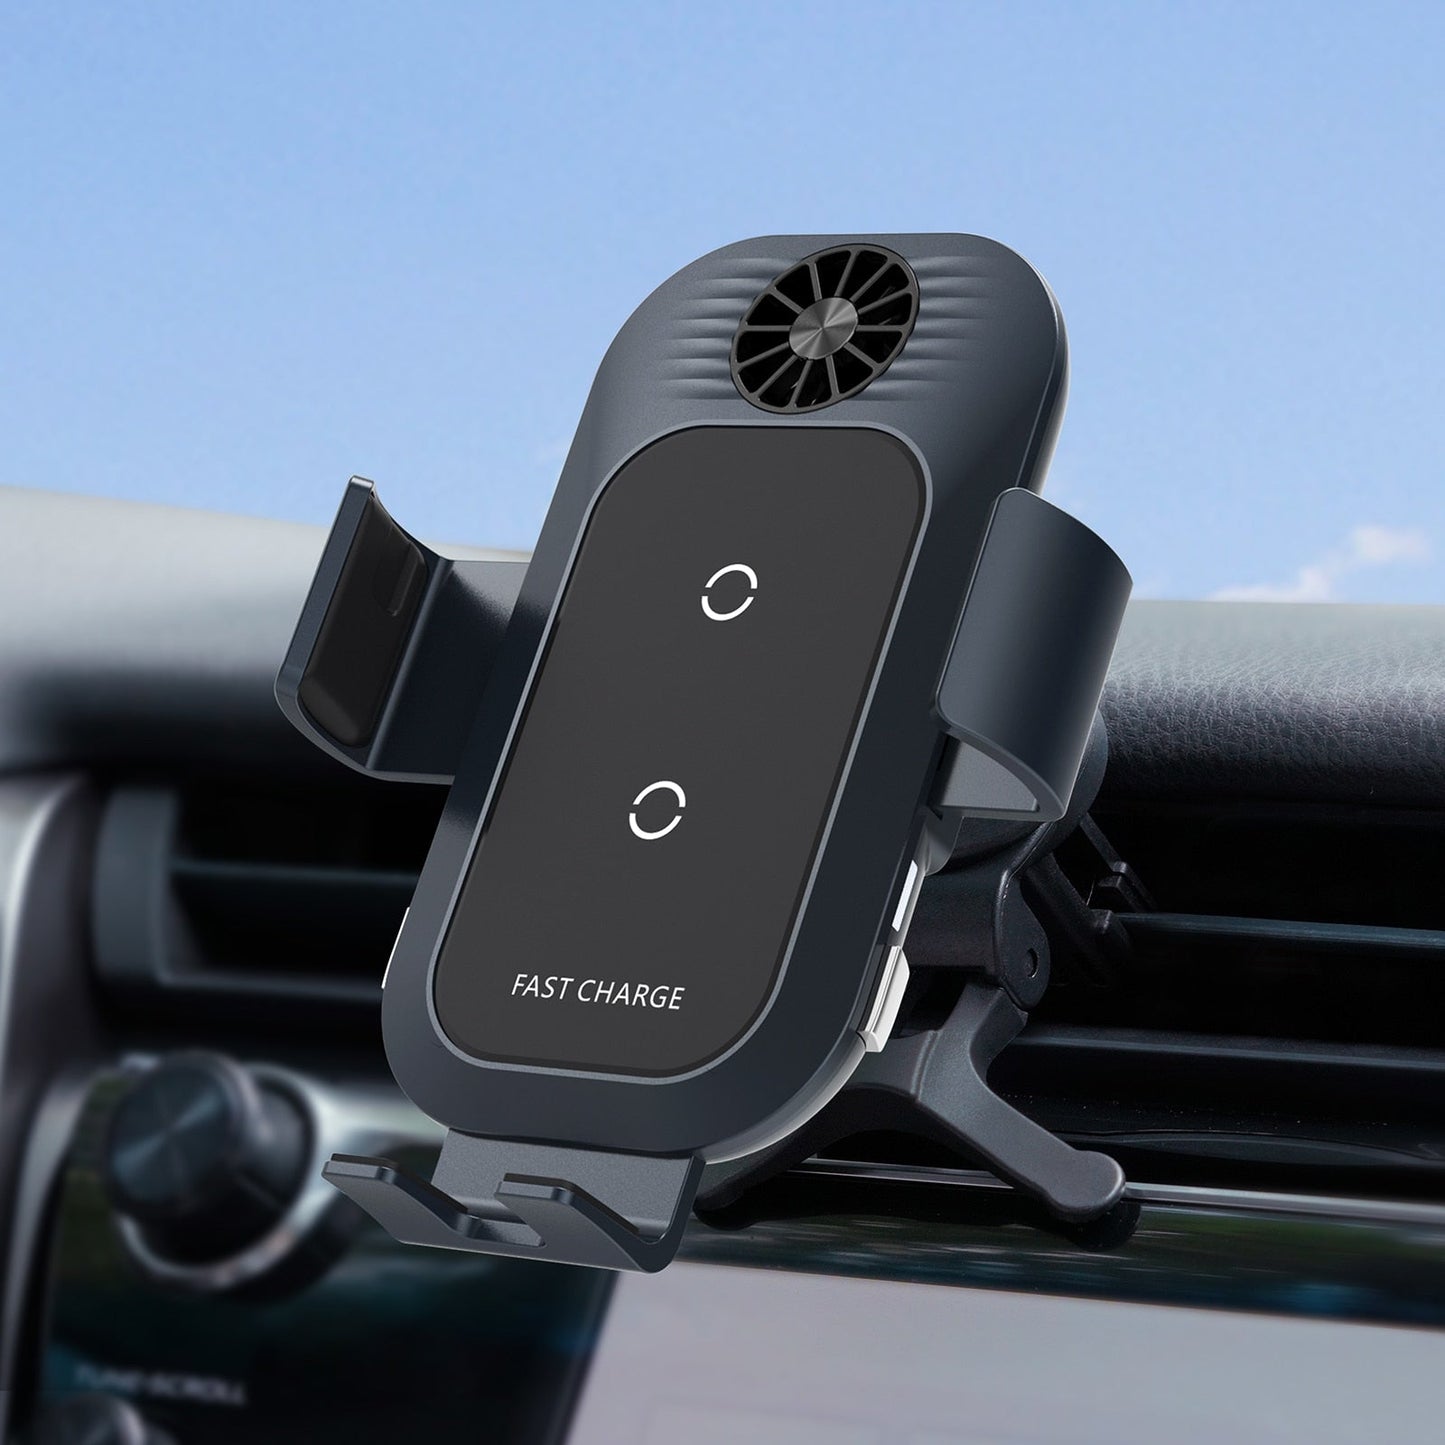 Dual Coil Car Wireless Charger - S23 Series